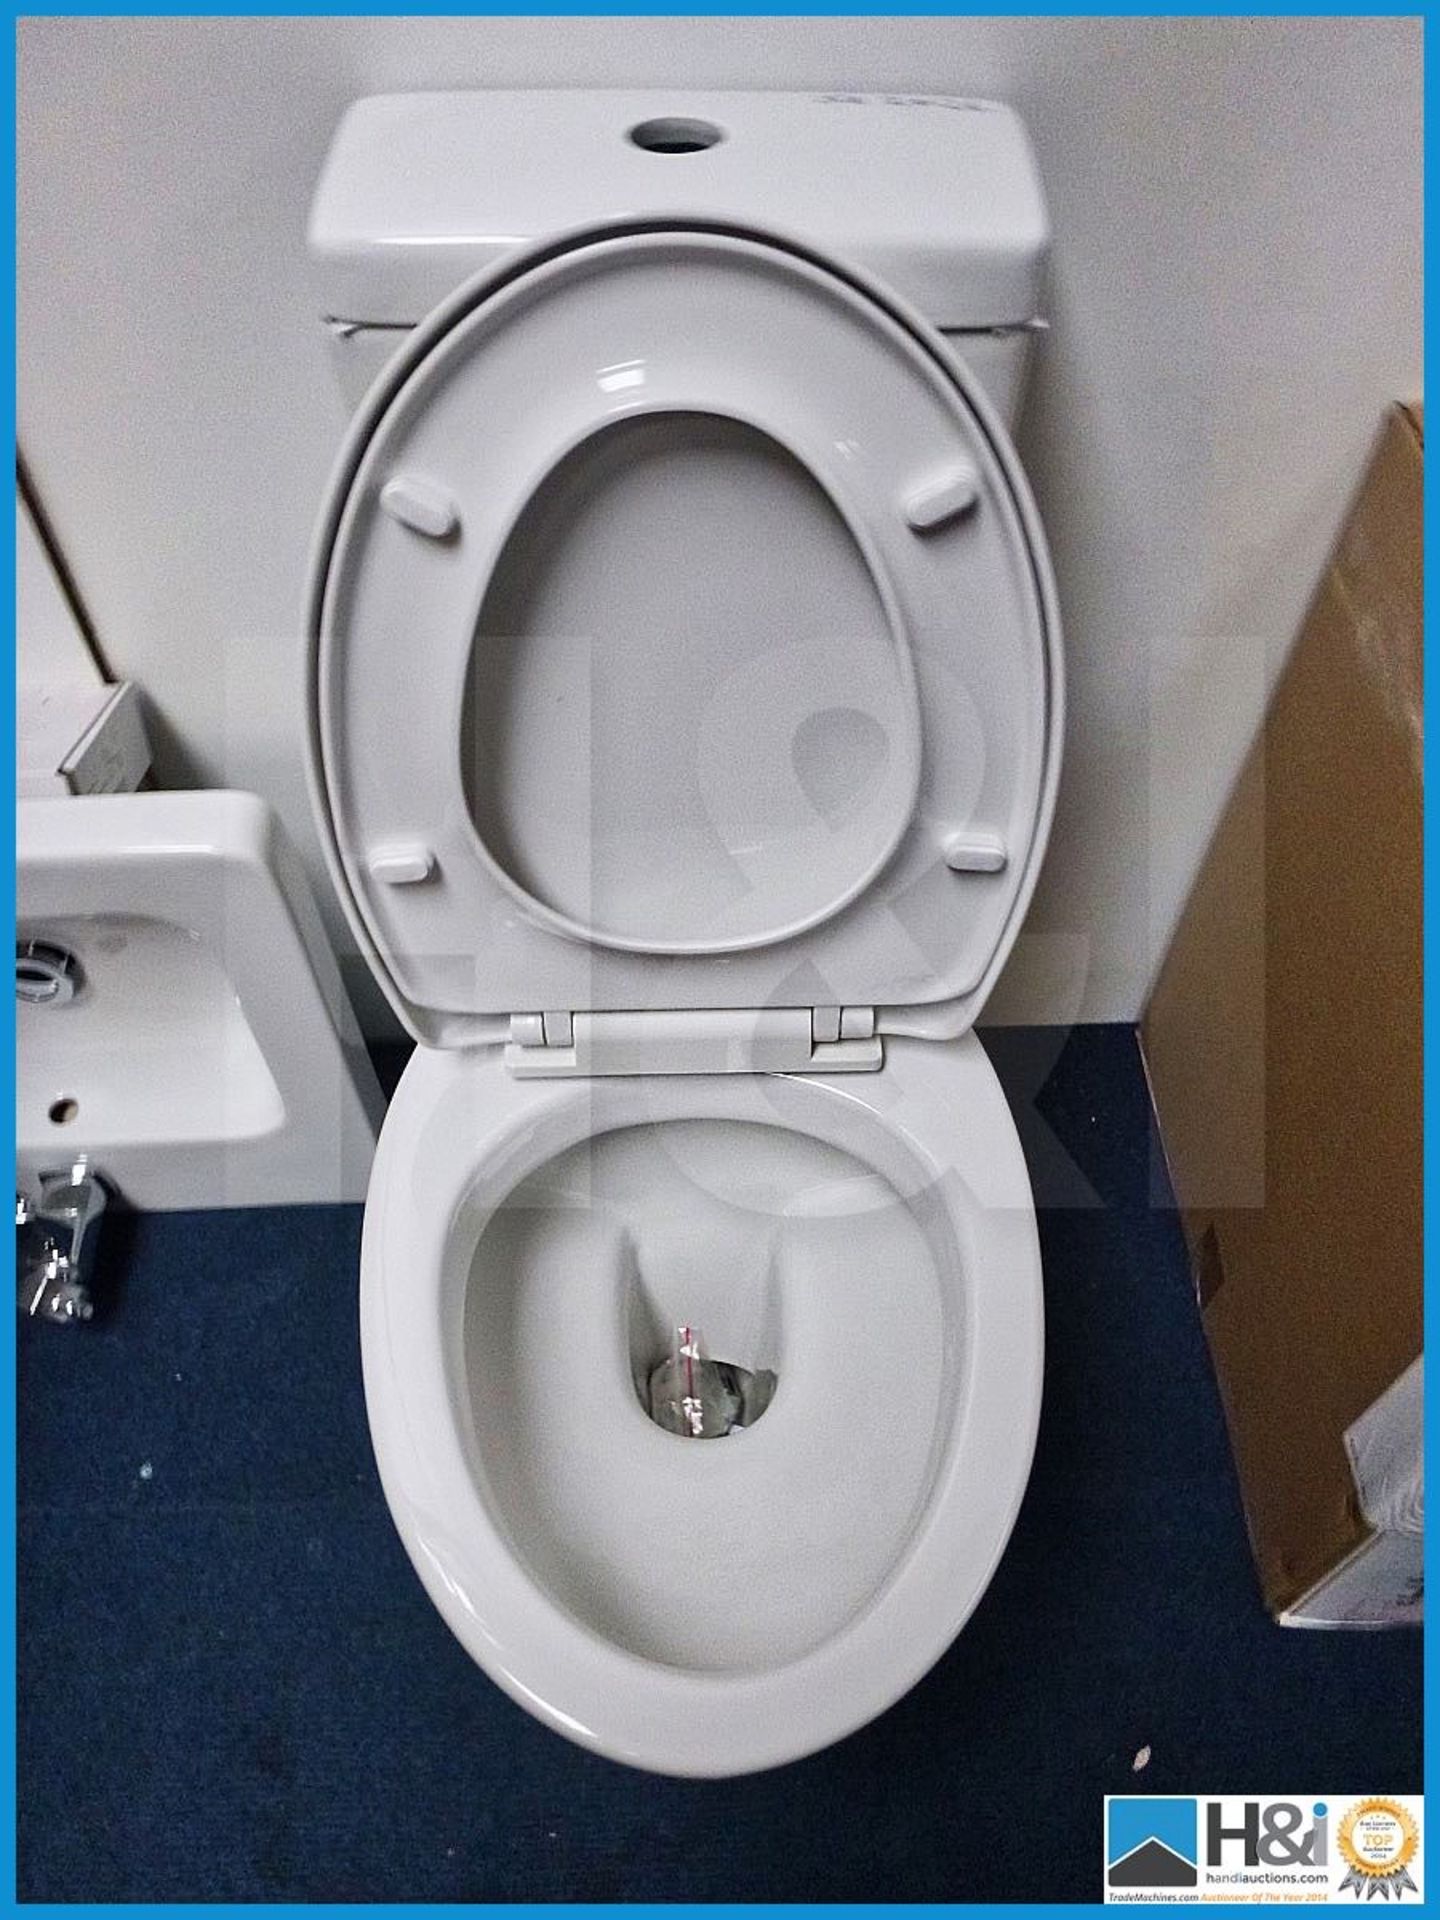 Designer full fascia close couple WC complete with detatchable soft close seat. JC-2026. RRP 599 GBP - Image 2 of 3